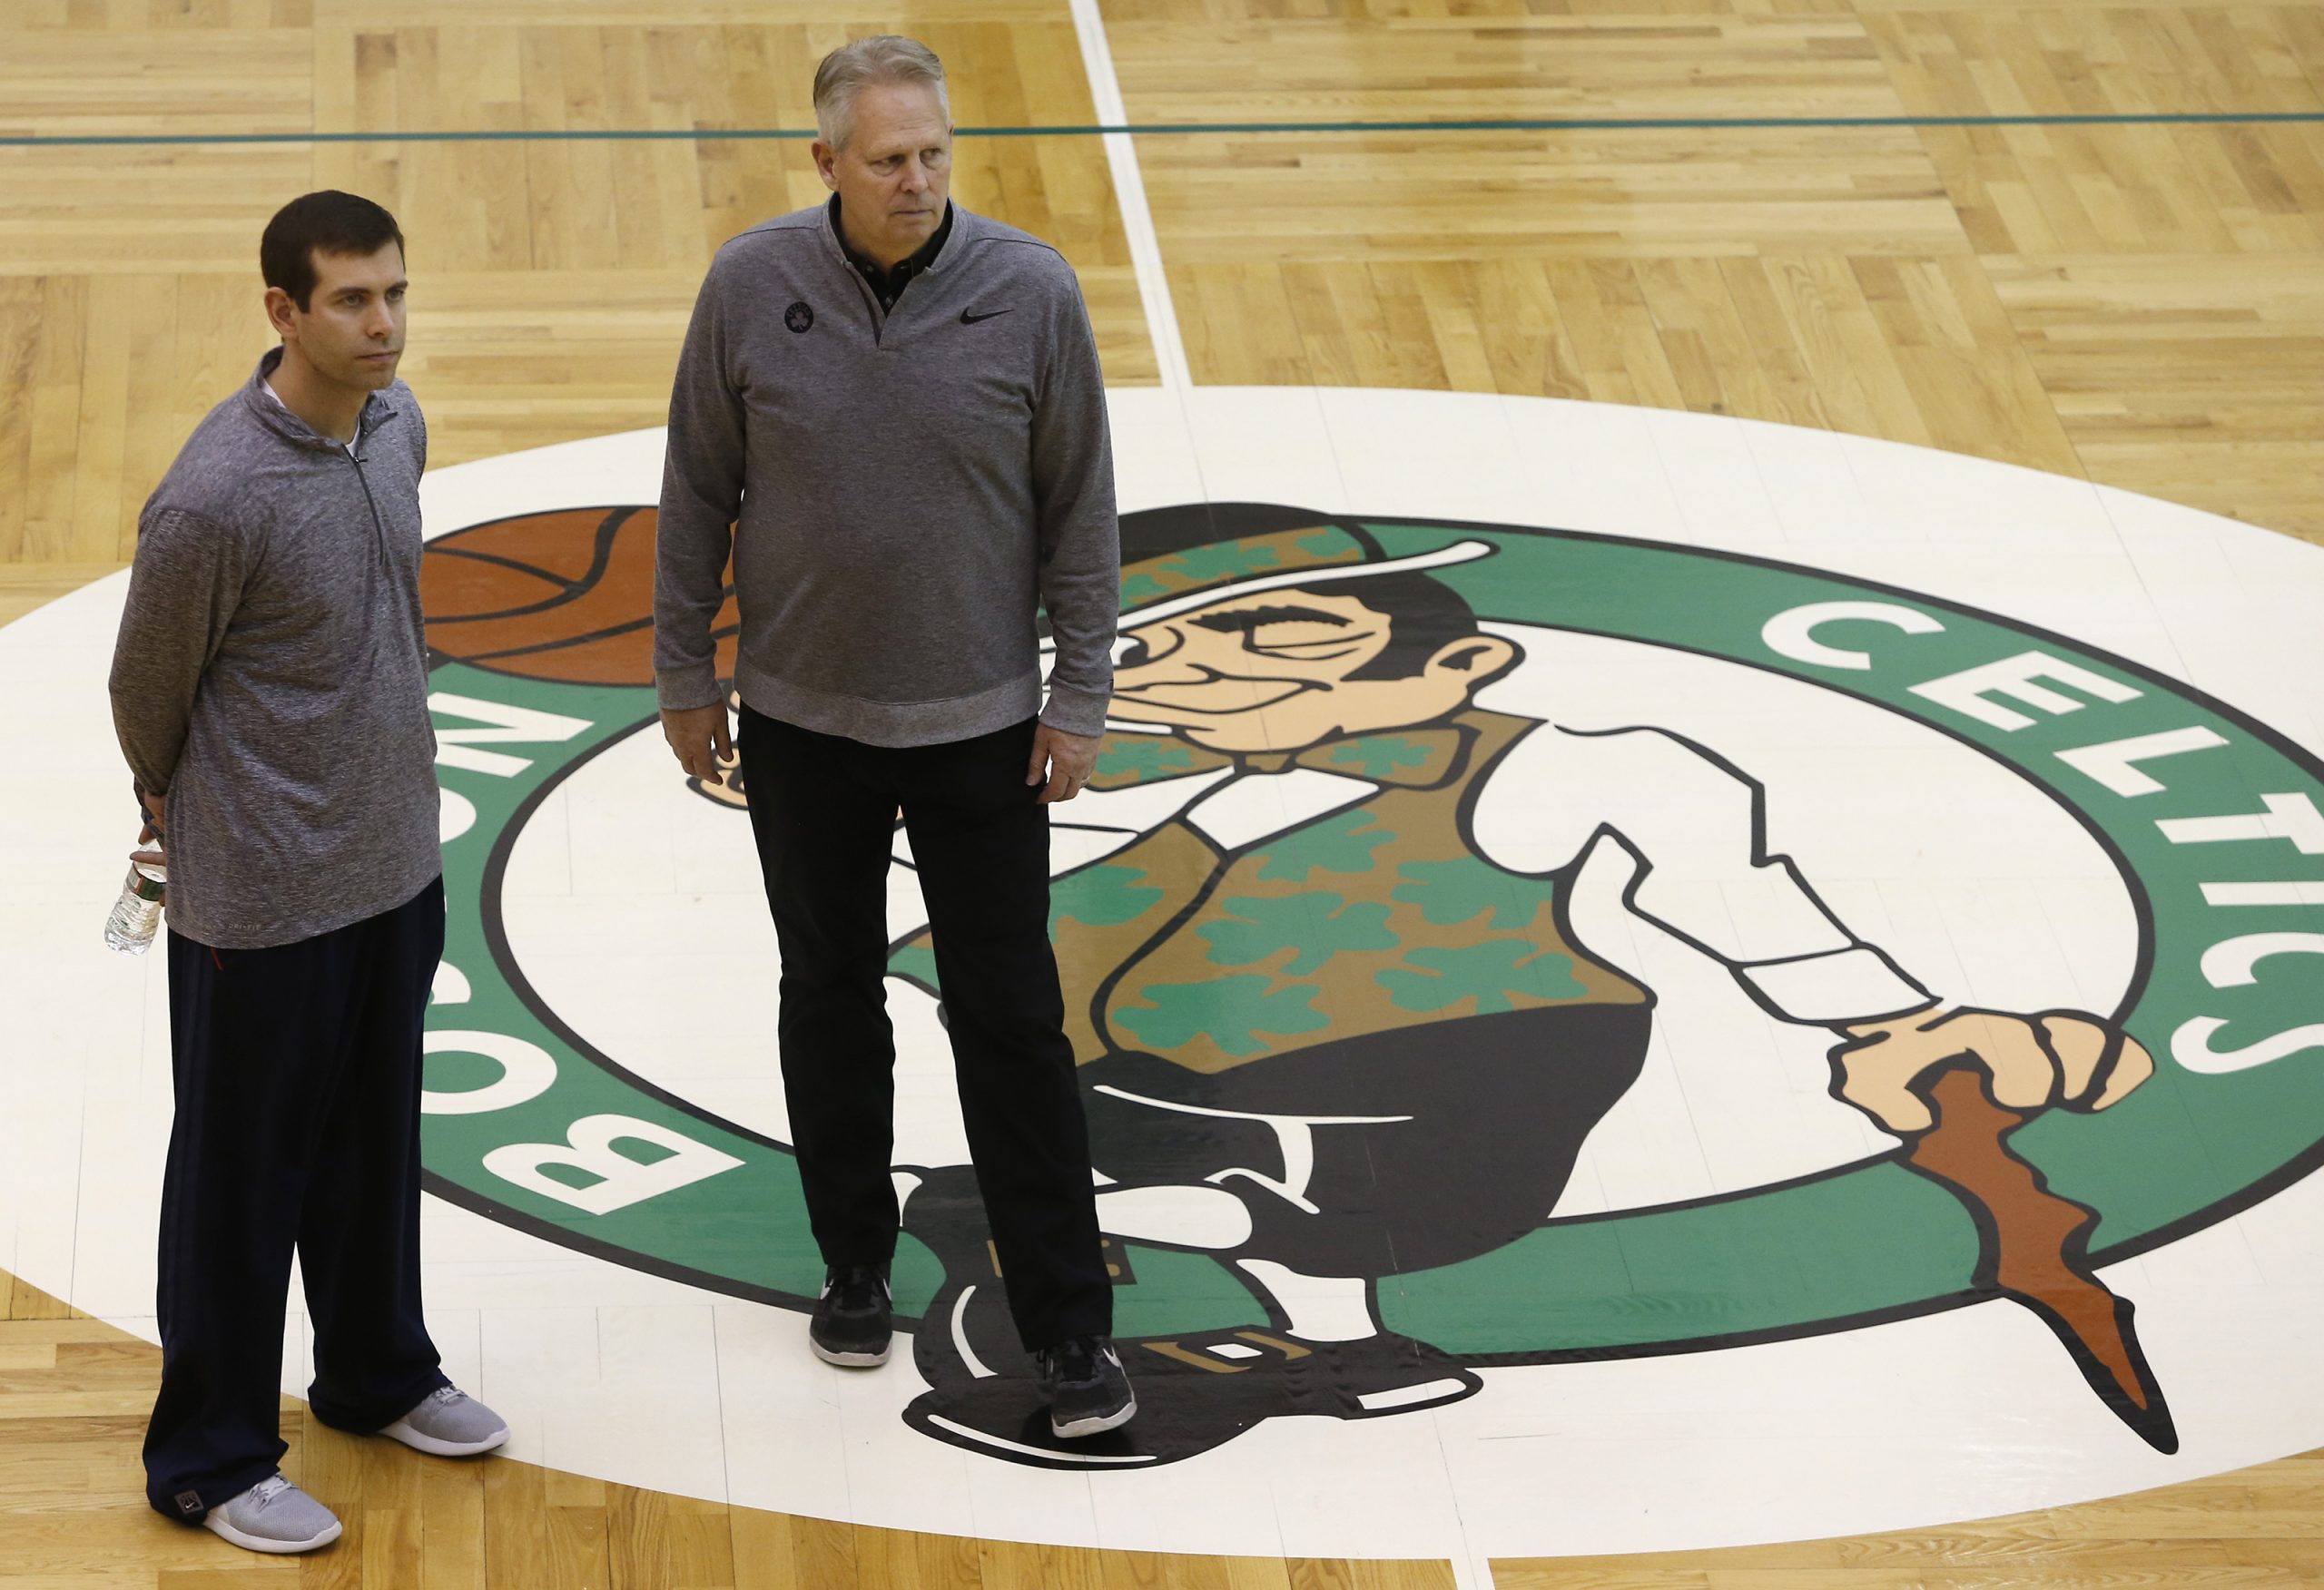 There's been a big shakeup with the Boston Celtics.